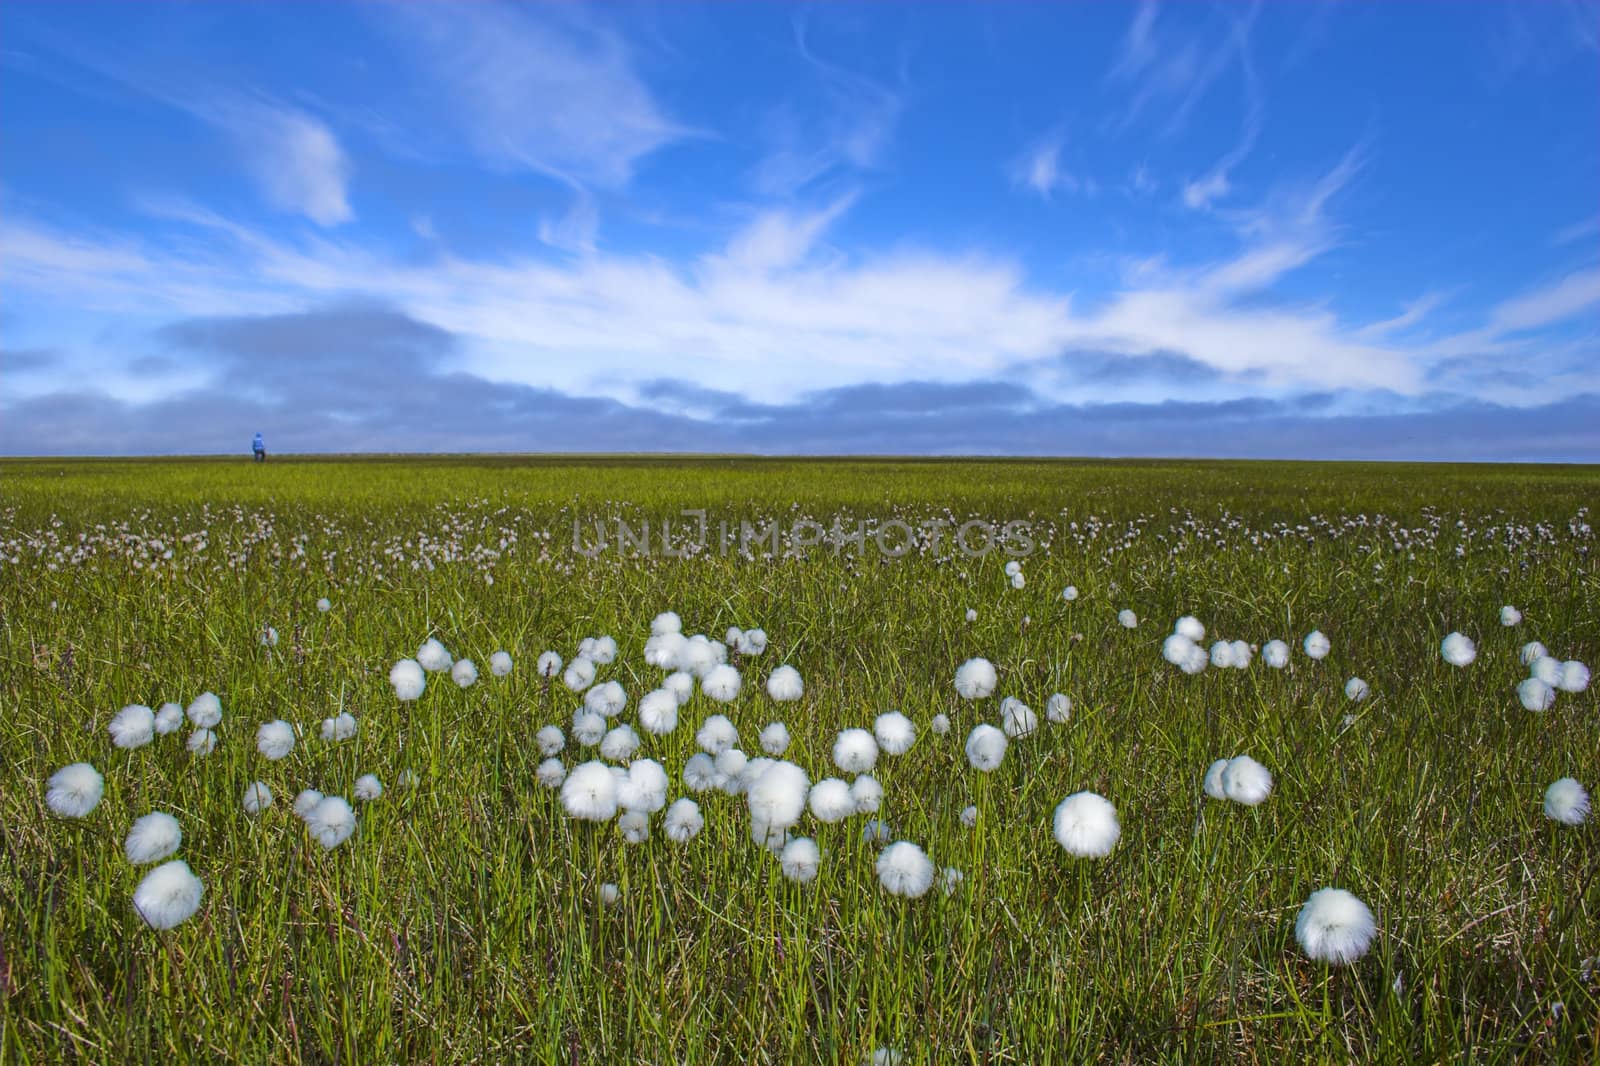 Arctic flowers bloom in the wind during polar summer